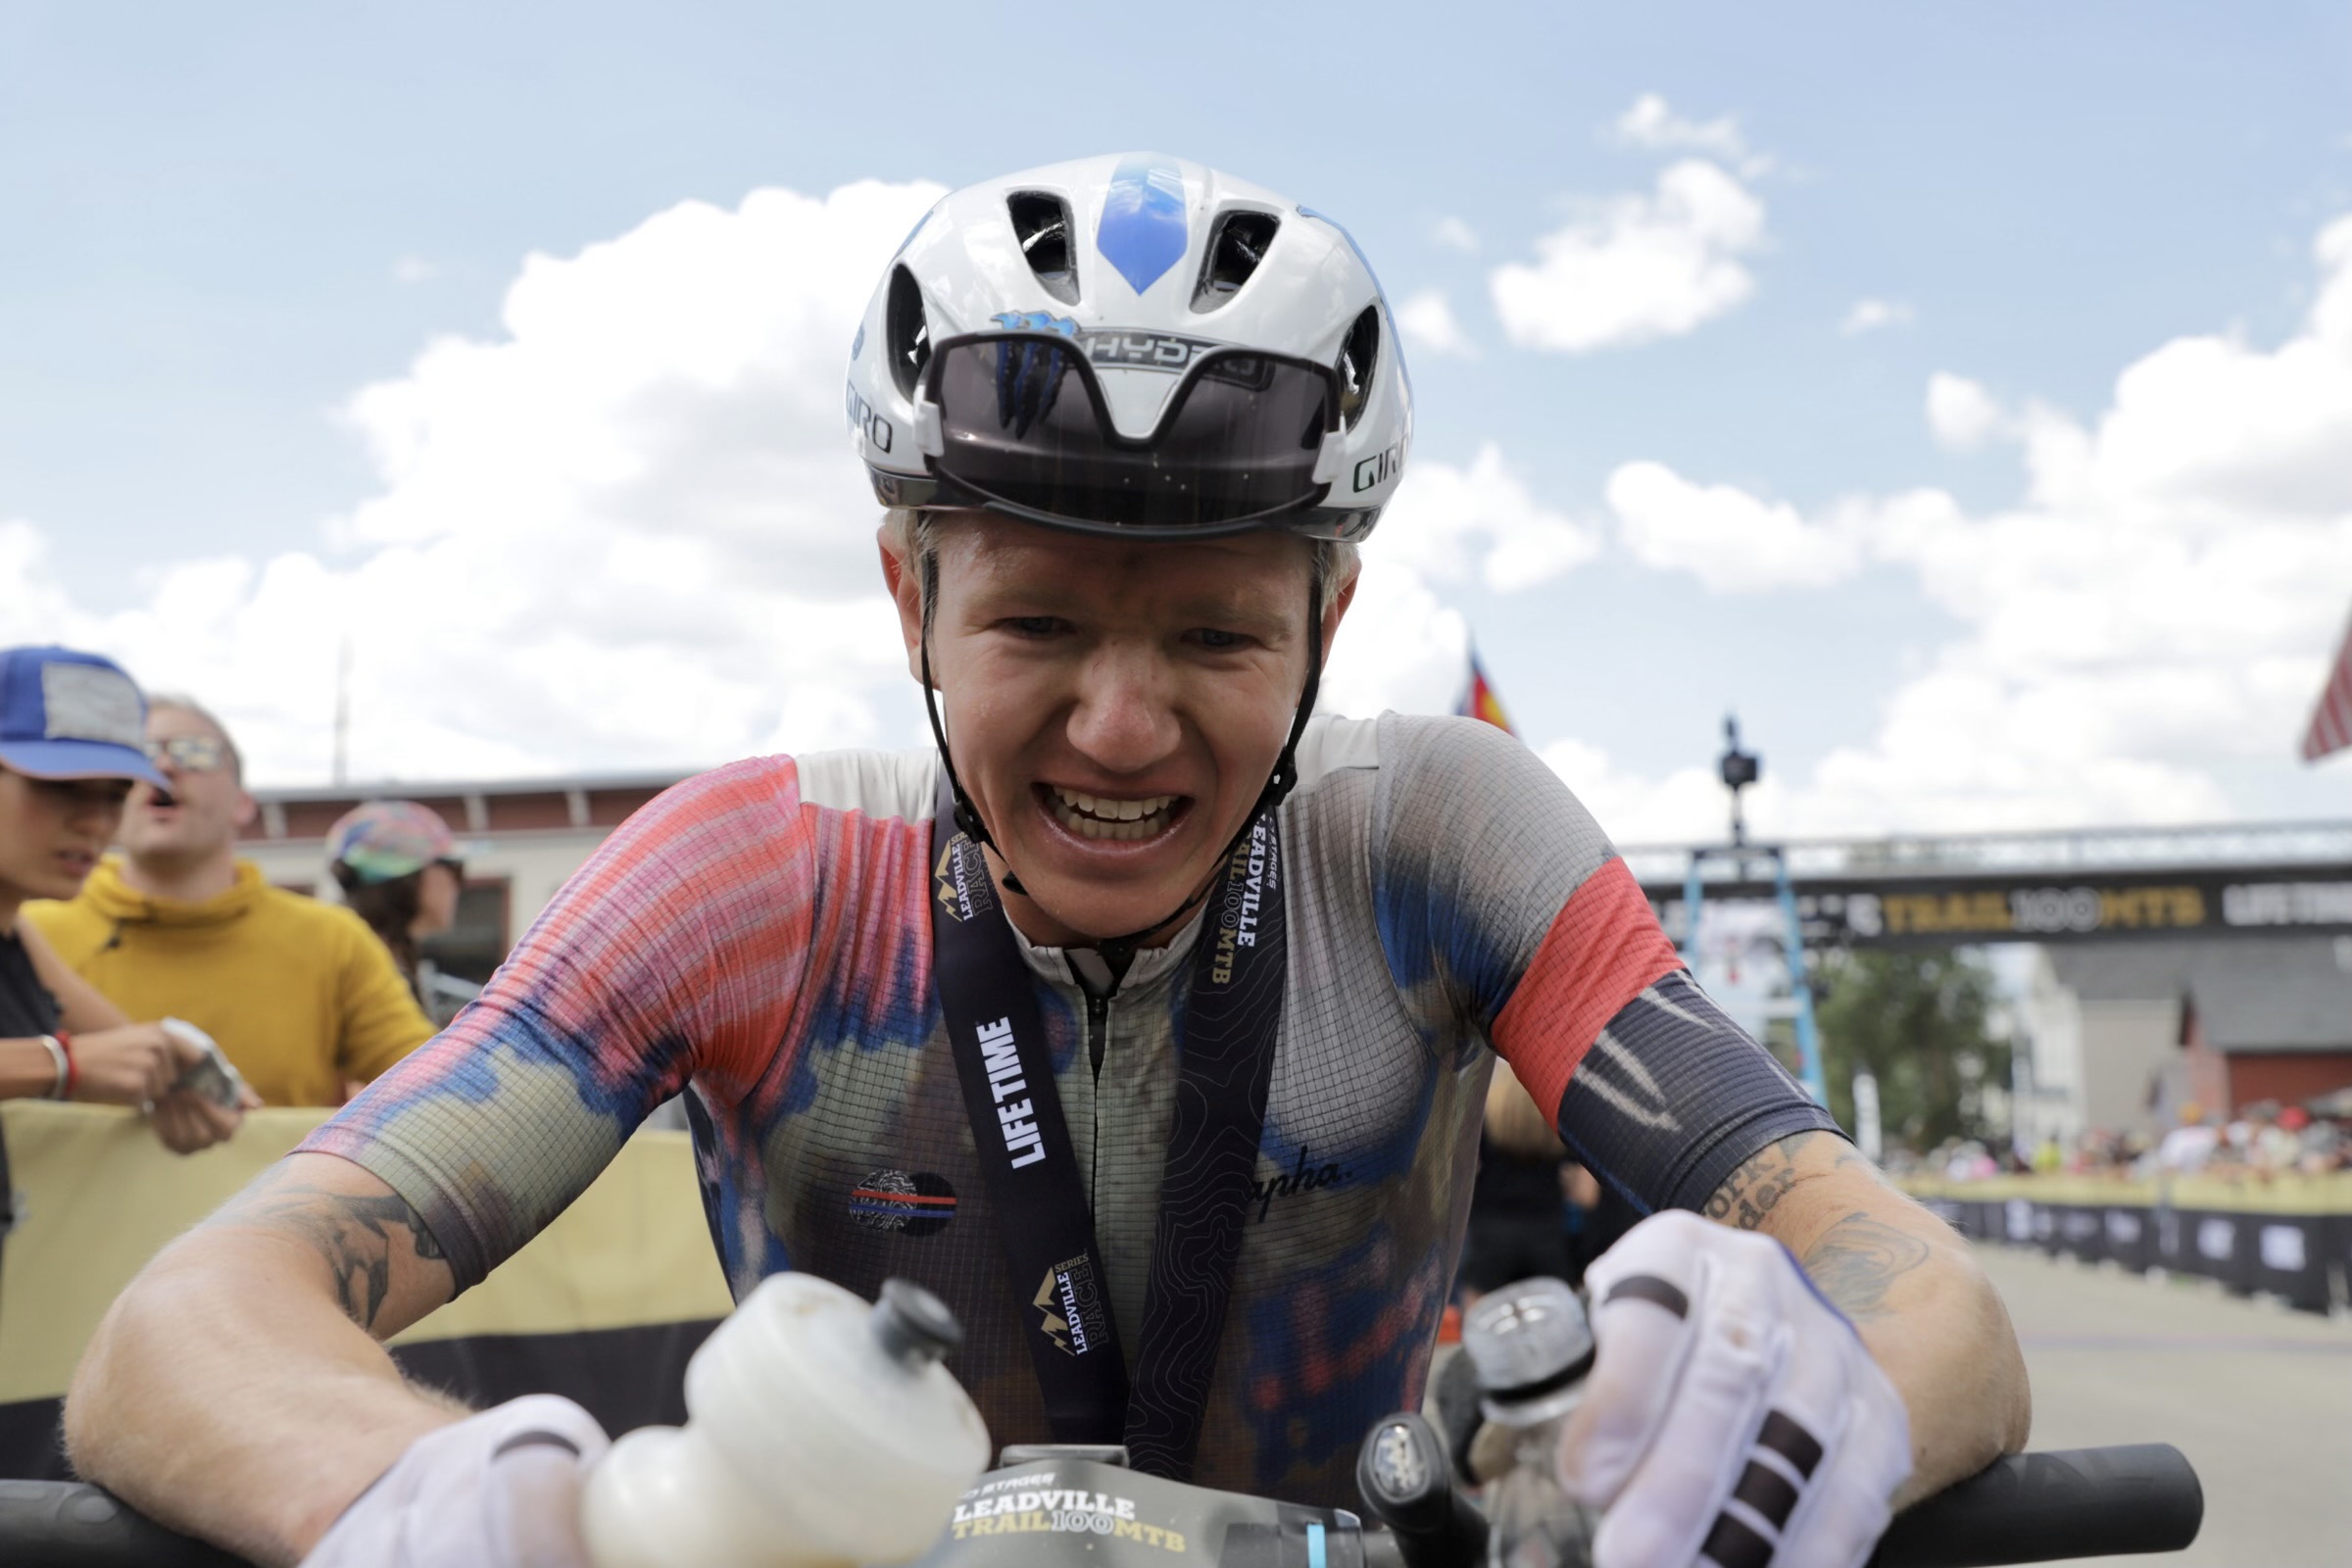 Keegan Swenson, shortly after winning the 2021 Leadville Trail 100. Photo courtesy Life Time